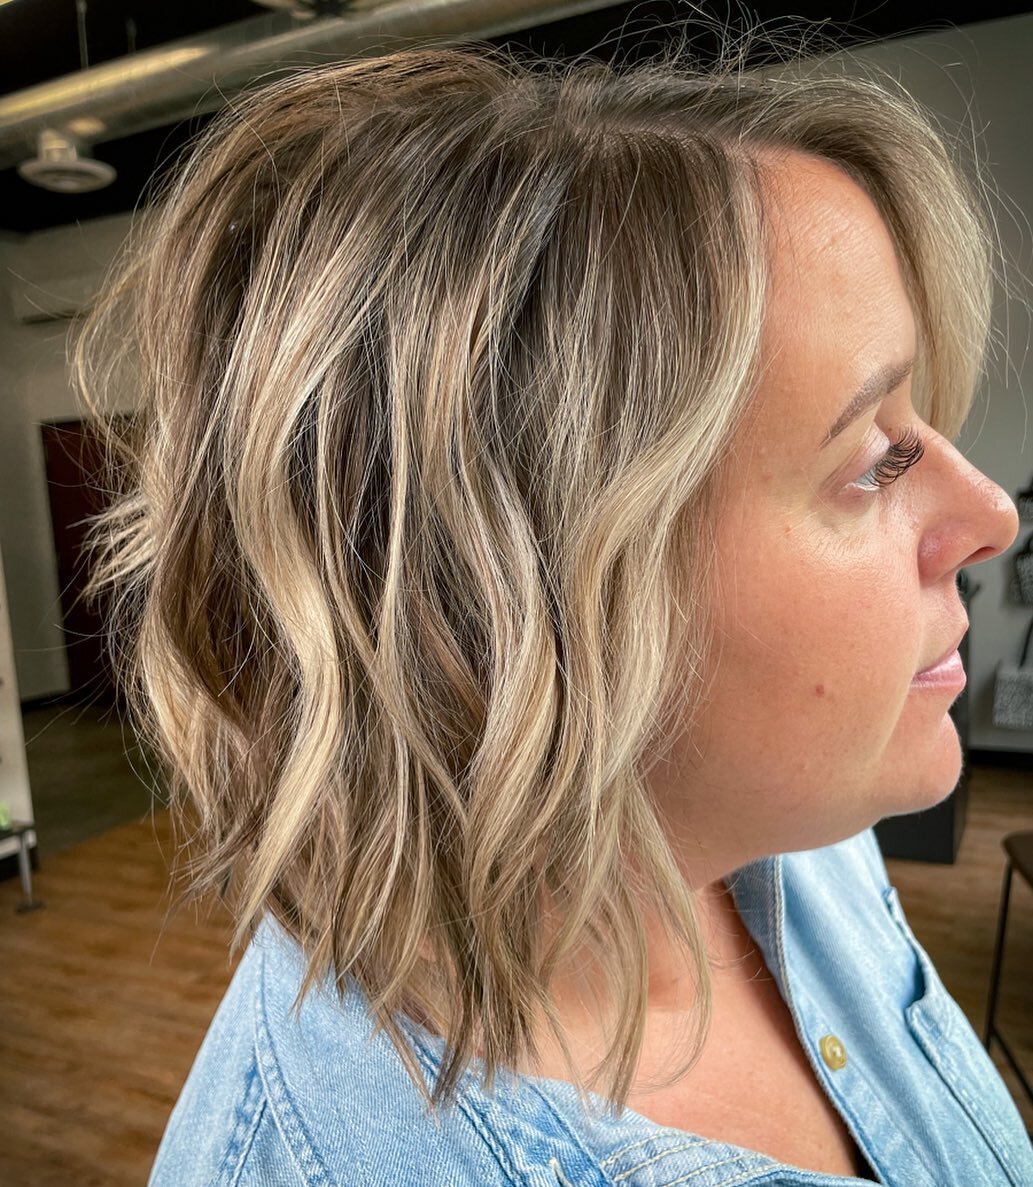 ✨Bringing Dimension Back to Your Hair! ✨

Are you tired of your hair looking all one color? Fear not! I'm here to help you unlock a whole new level of hair transformation. 💁&zwj;♀️

Dimensional Hair involves carefully placing highlights and lowlight